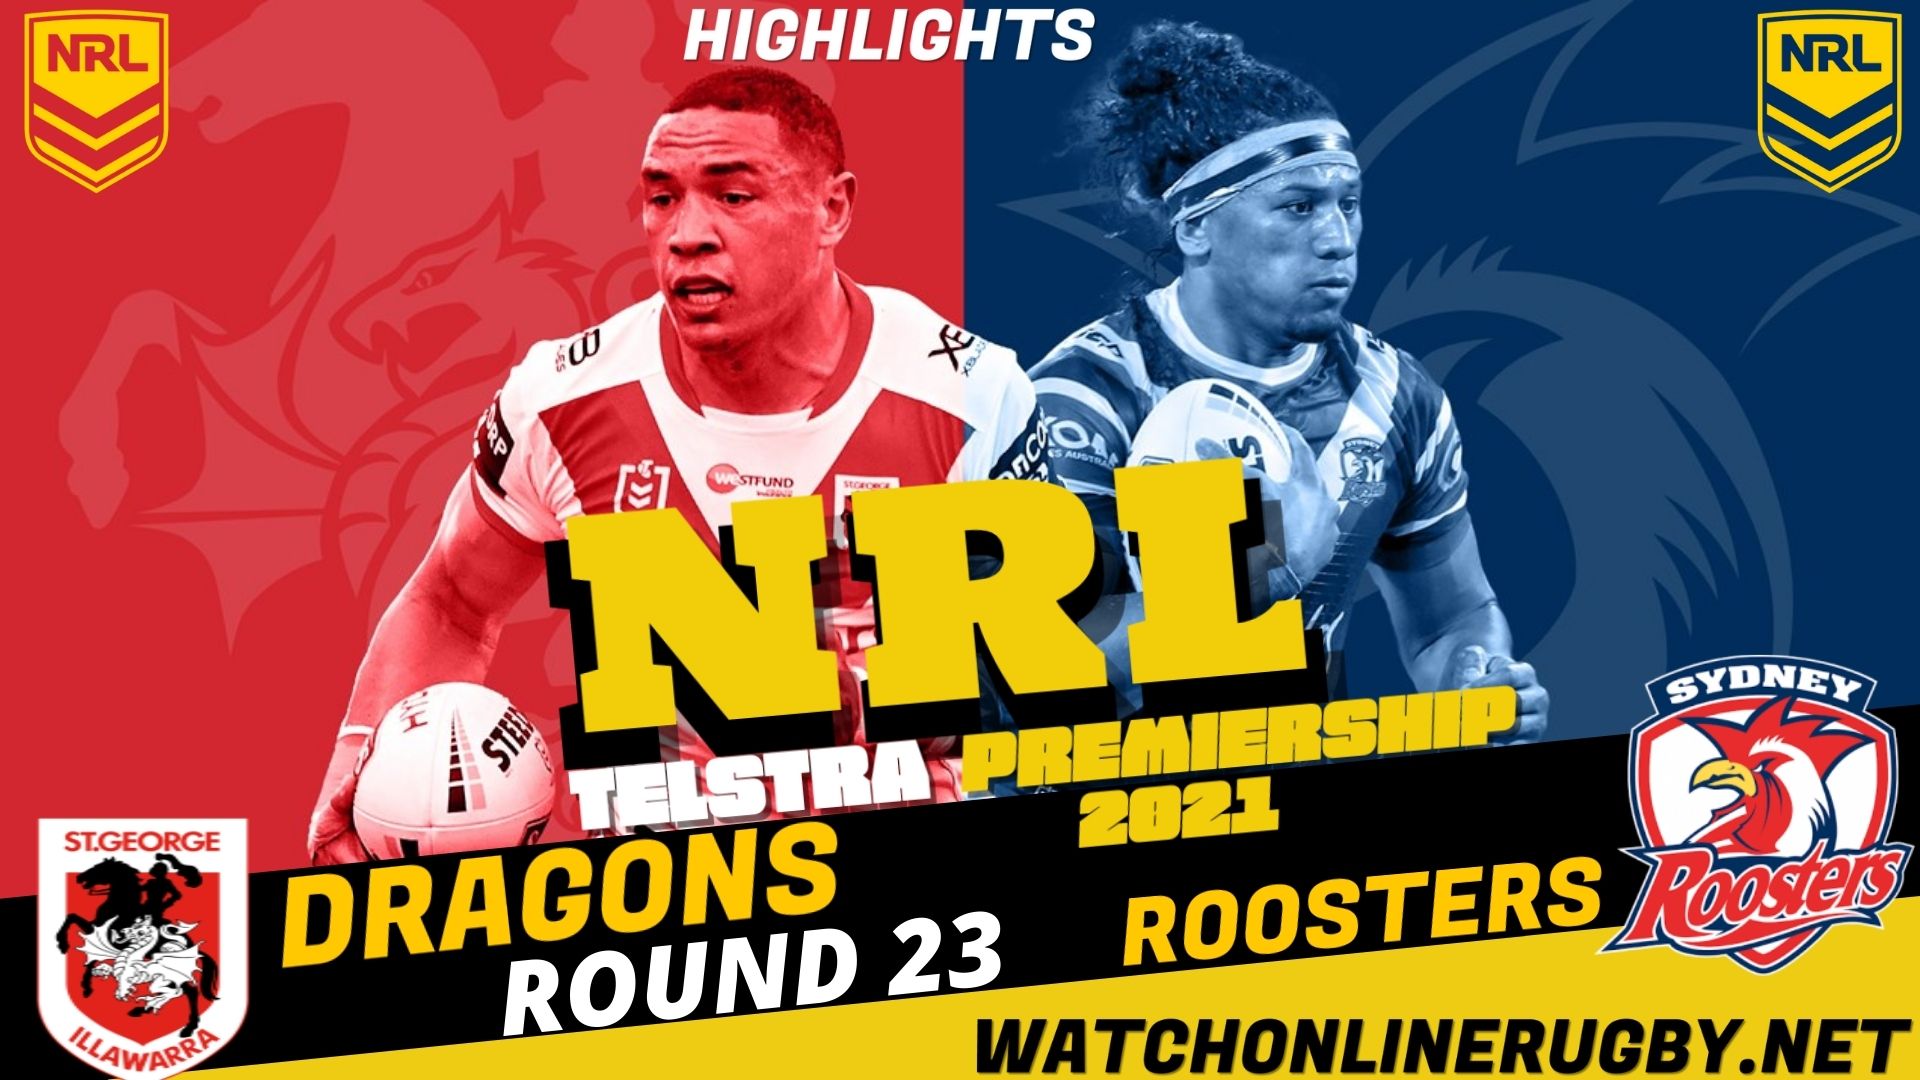 Dragons Vs Roosters Highlights 2021 RD 23 NRL Rugby